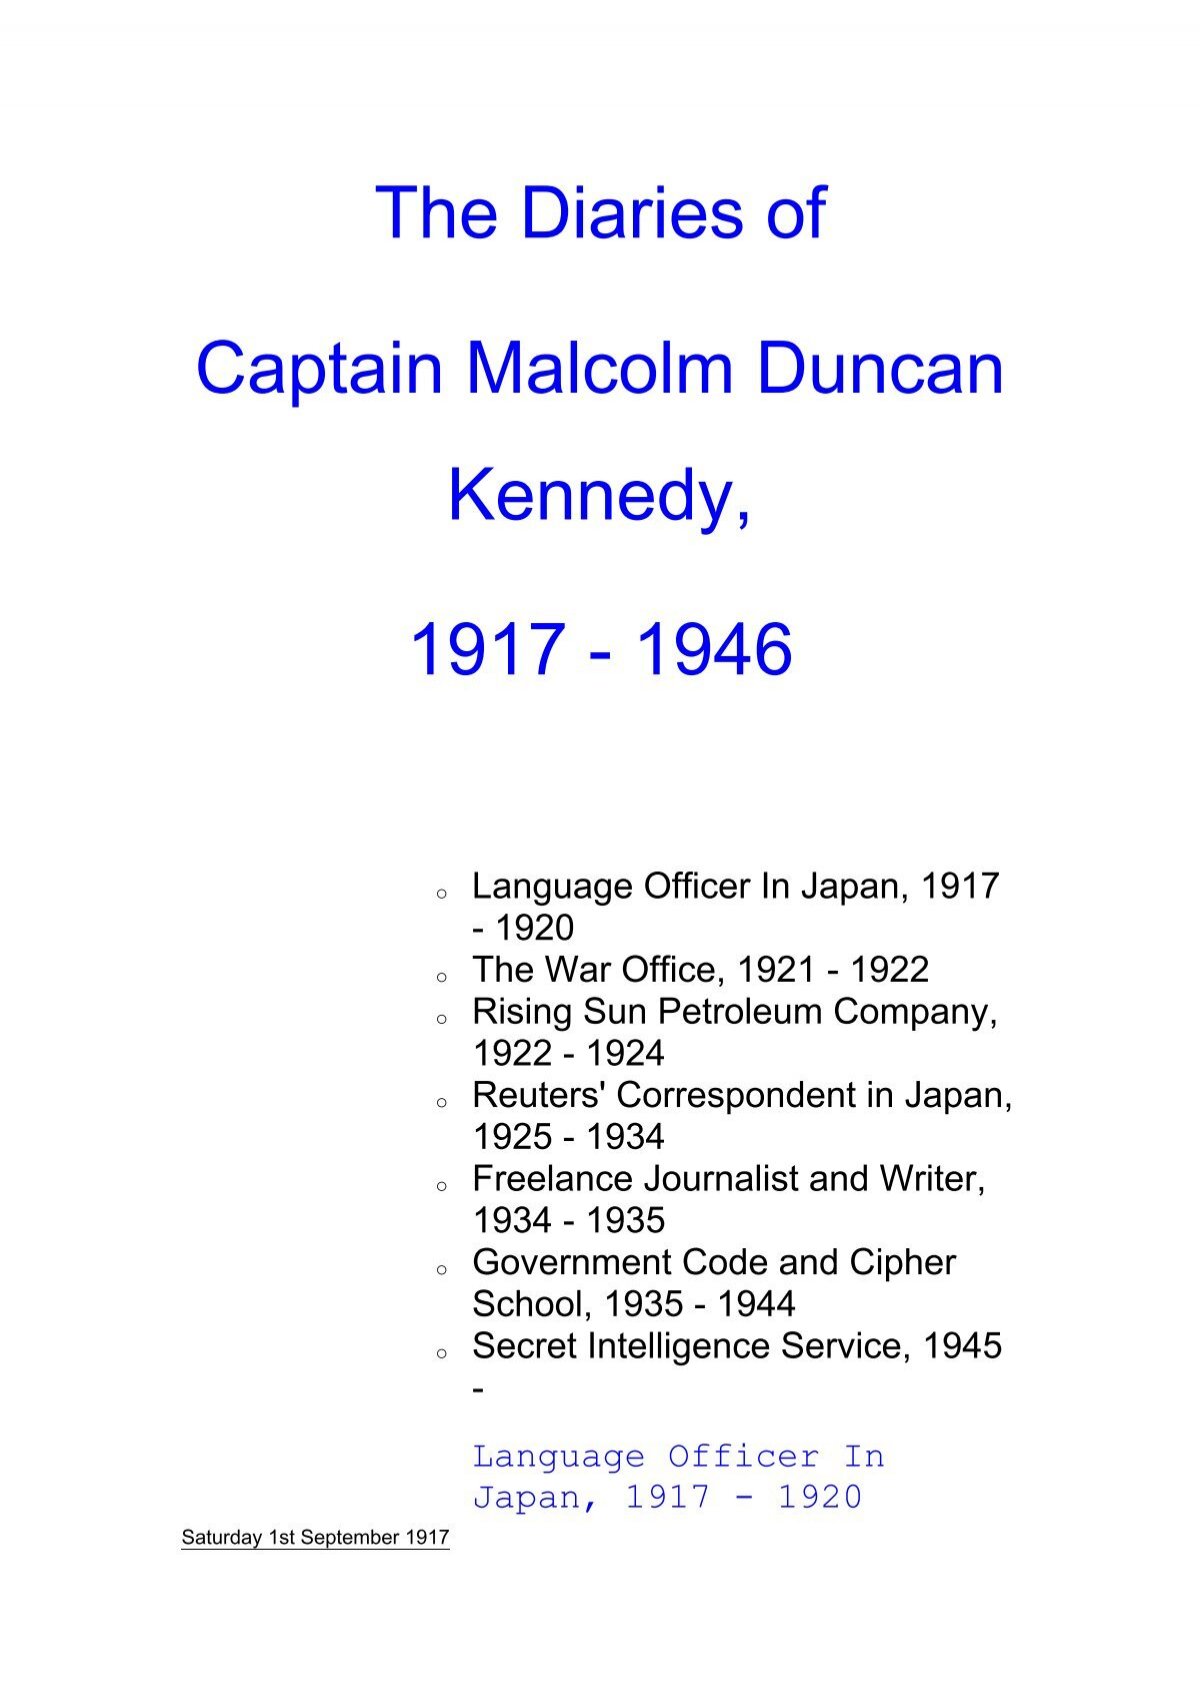 The Diaries of Captain Malcolm Duncan Kennedy, 1917 - 1946